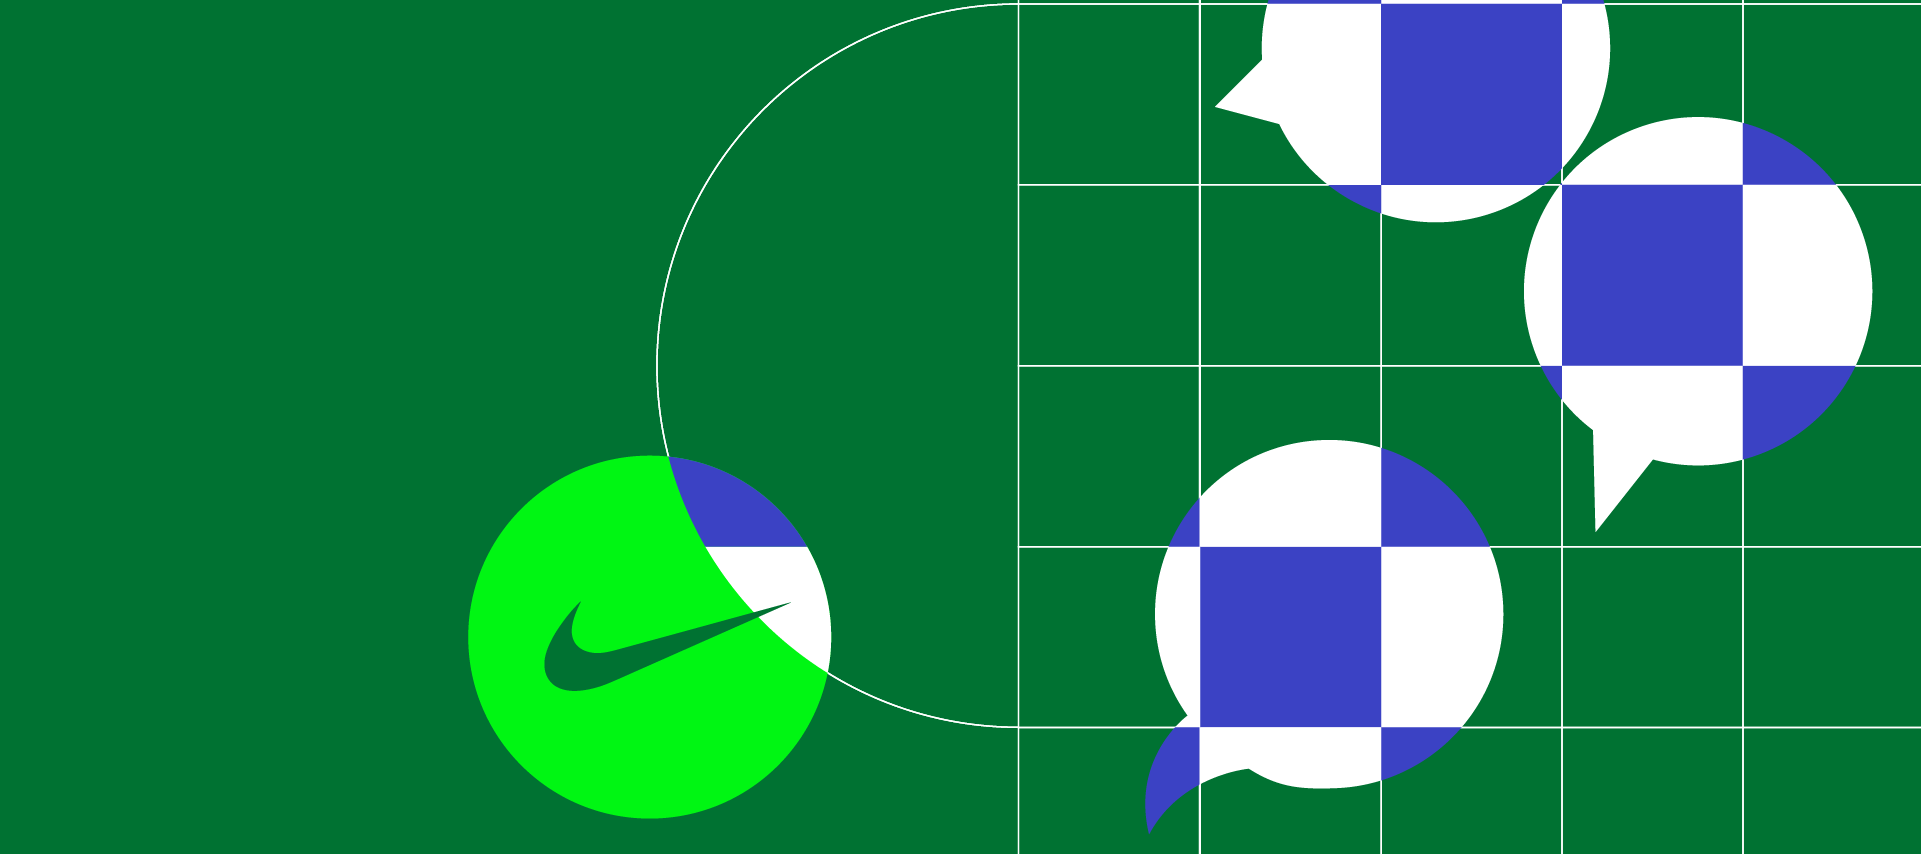 Here’s how Nike Football leveraged Manychat to bring the Engage Mbappé Mode campaign to life!